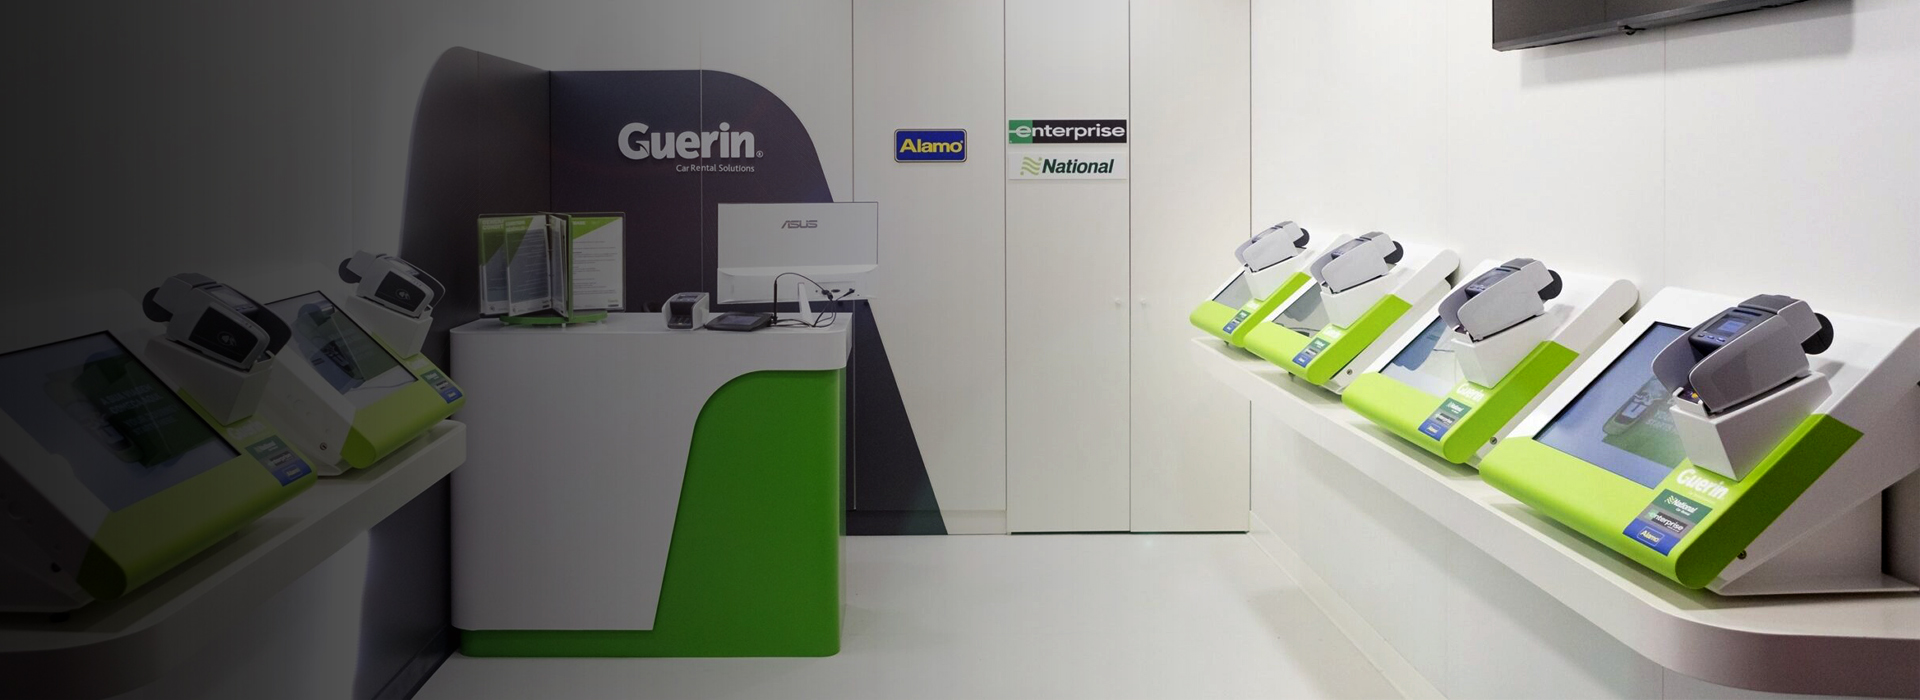 <span class='text-highlight'>Guerin</span> opens new store in the Azores with <span class='text-highlight'>Self-service Kiosks</span> from PARTTEAM & OEMKIOSKS for Vehicle Rental